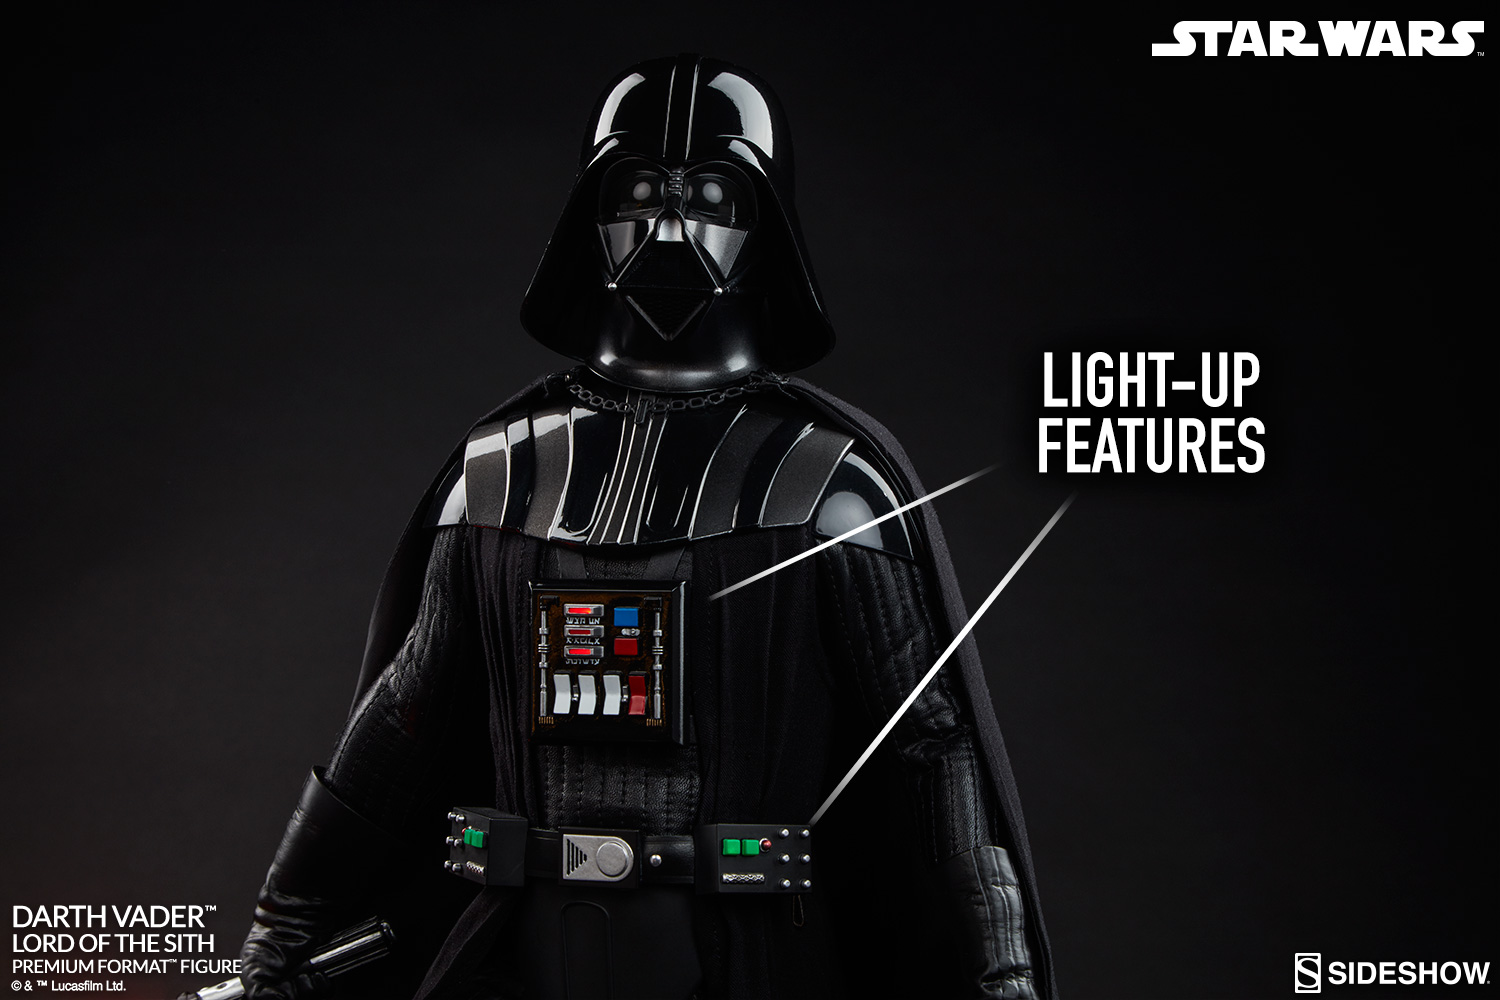 Darth Vader – Lord of the Sith  Premium Format by Sideshow Collectibles  Episode VI   